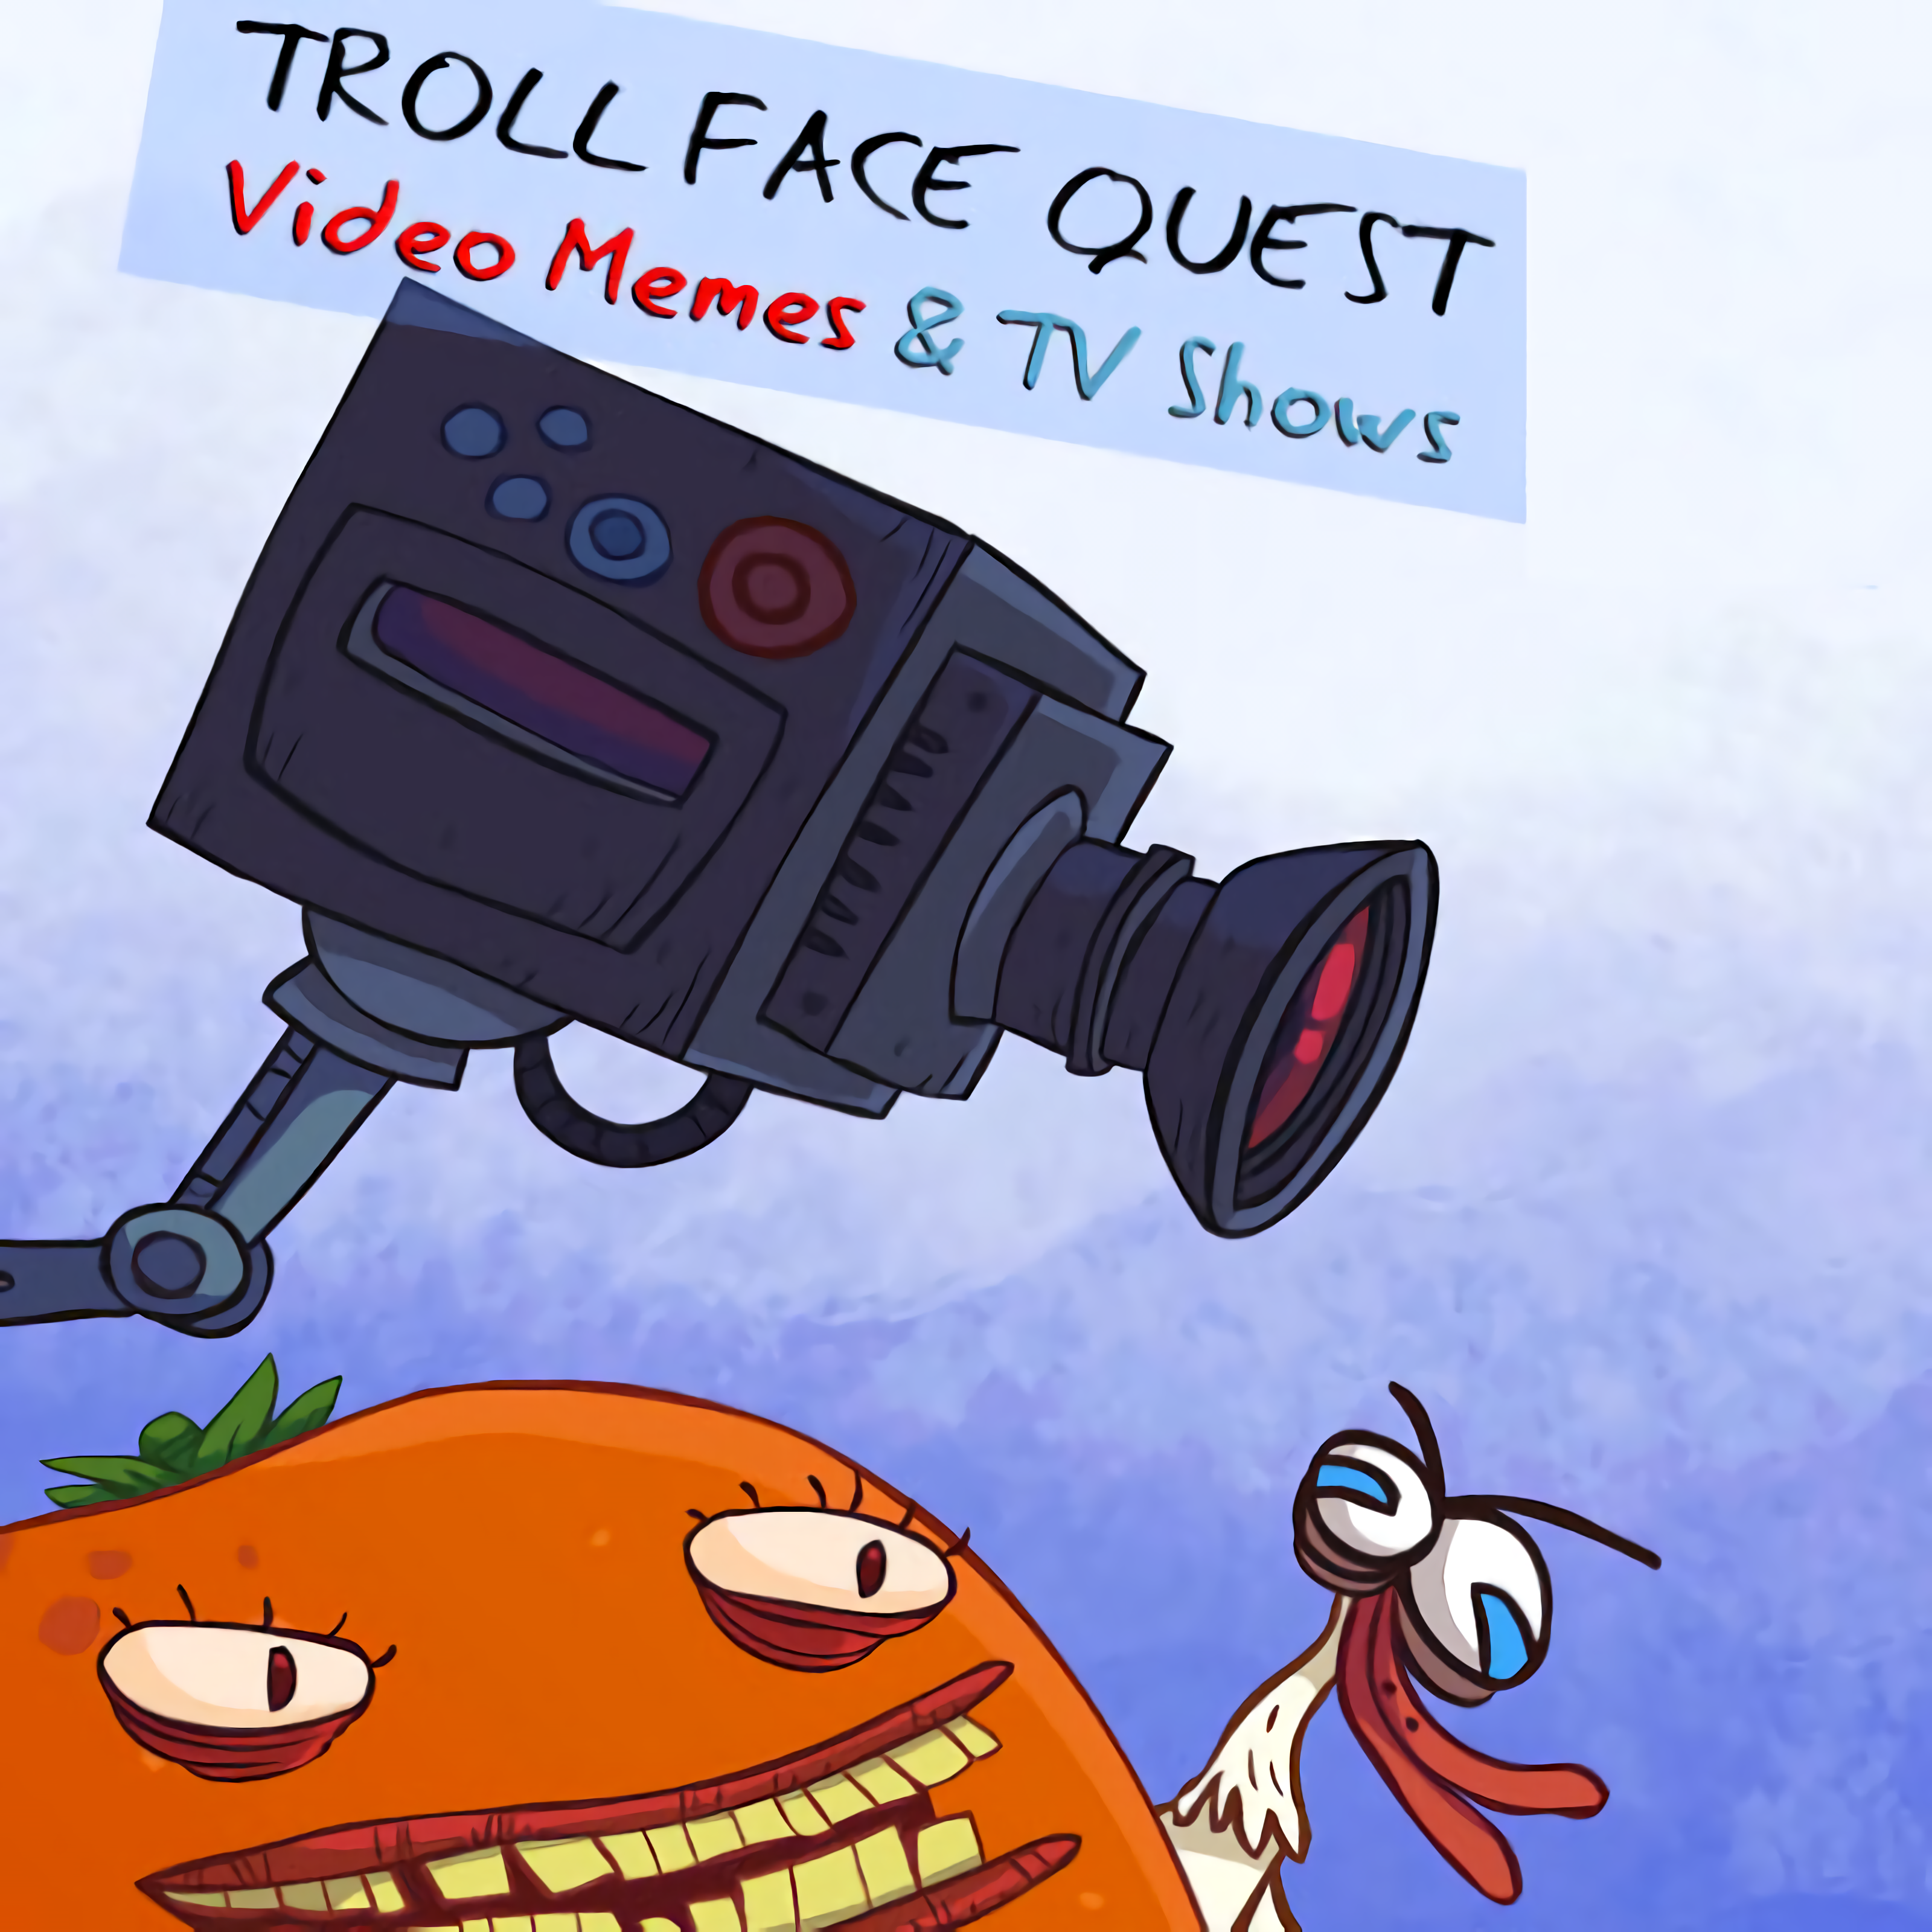 Trollface Quest Video Memes and TV Shows